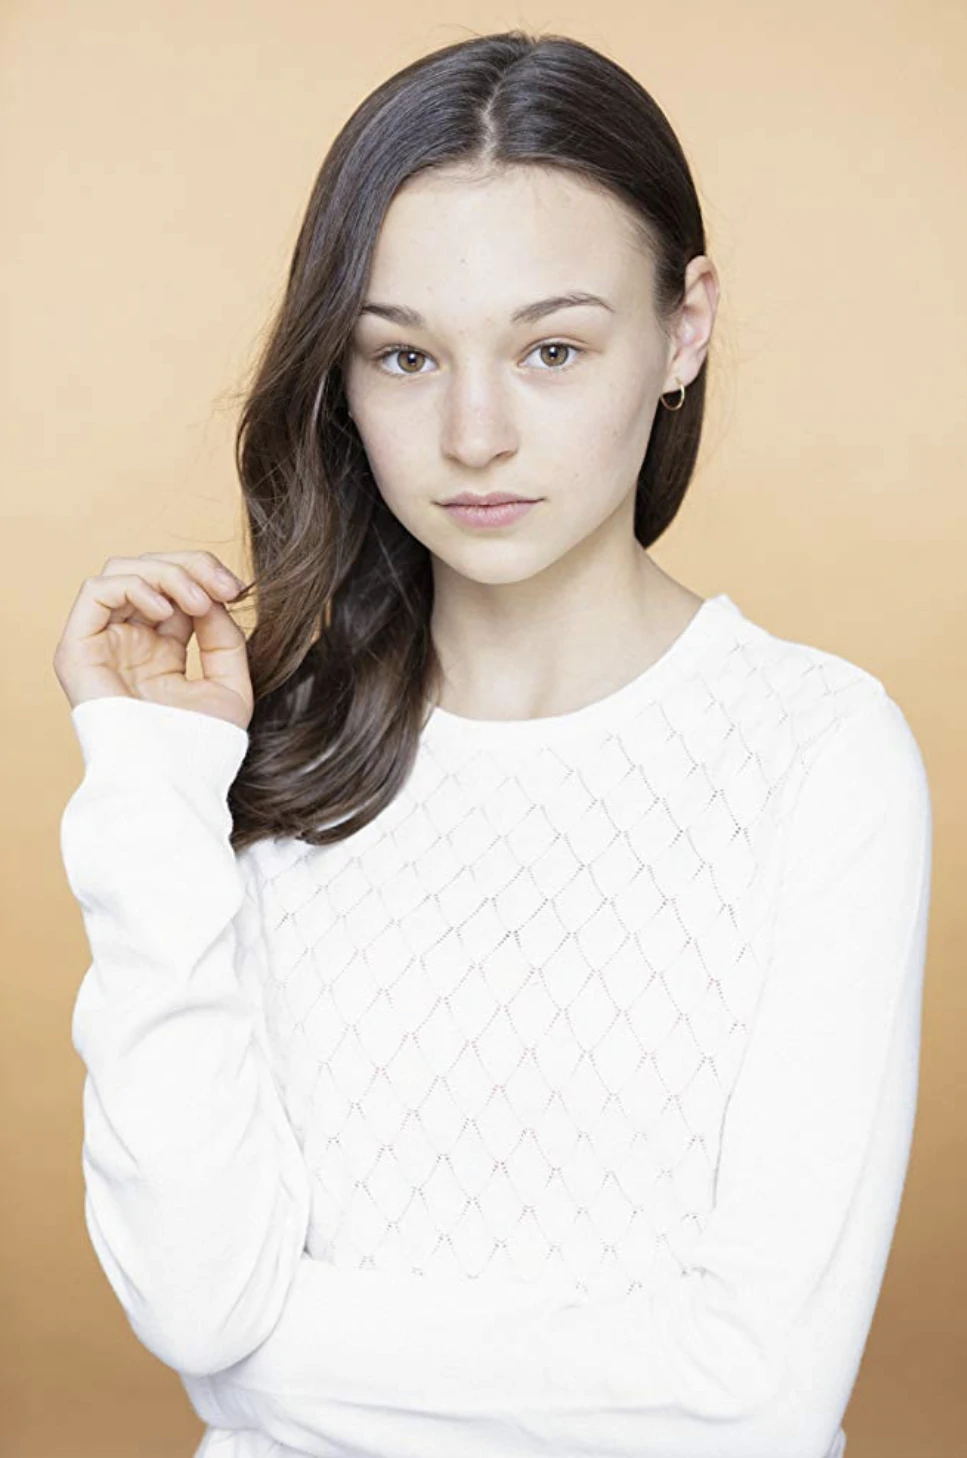 Zoe Marlett - A Young Actress And Voice Artist From Vancouver, British Columbia